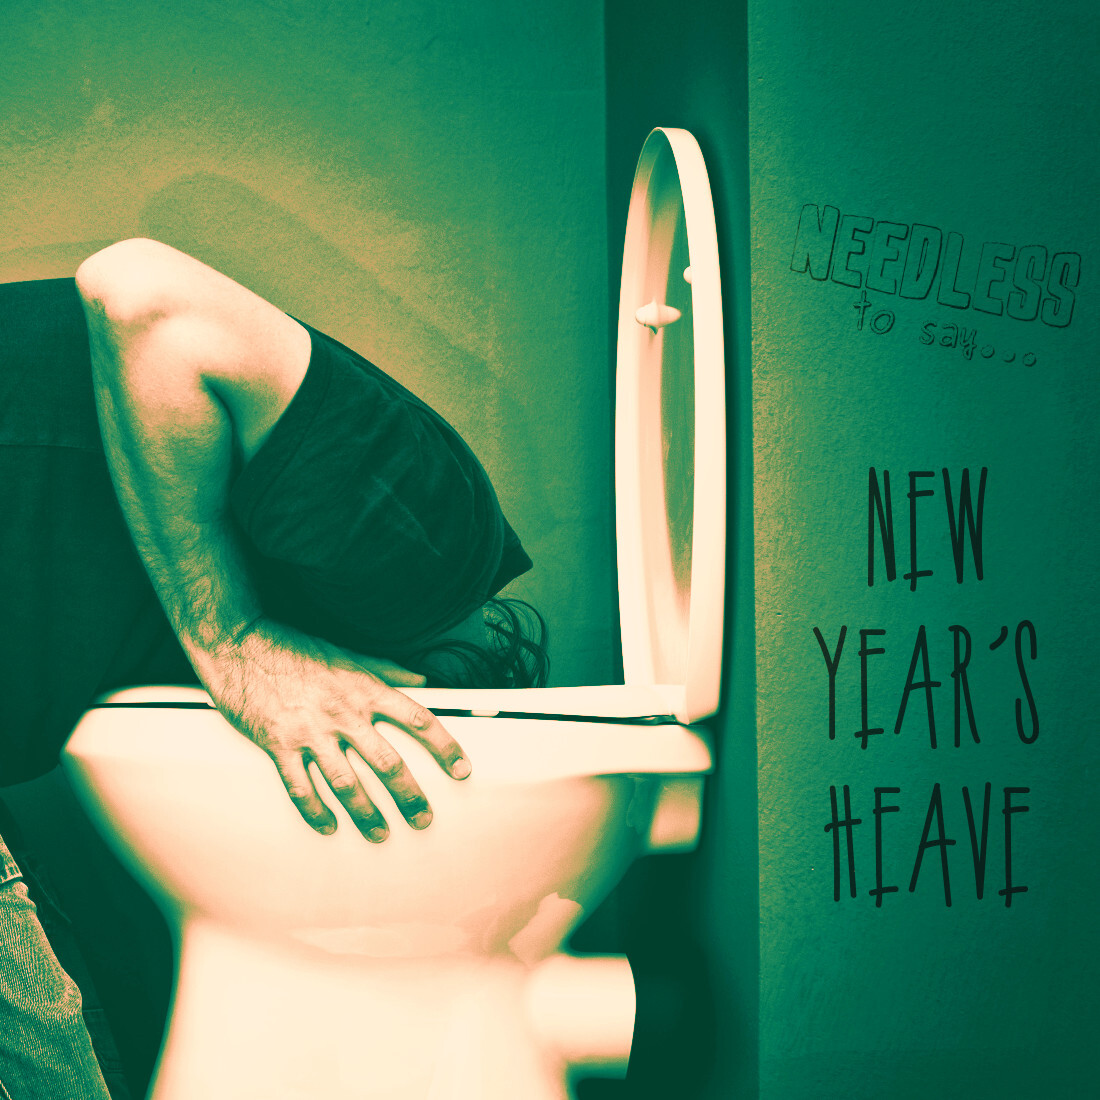 New Year's Heave Image